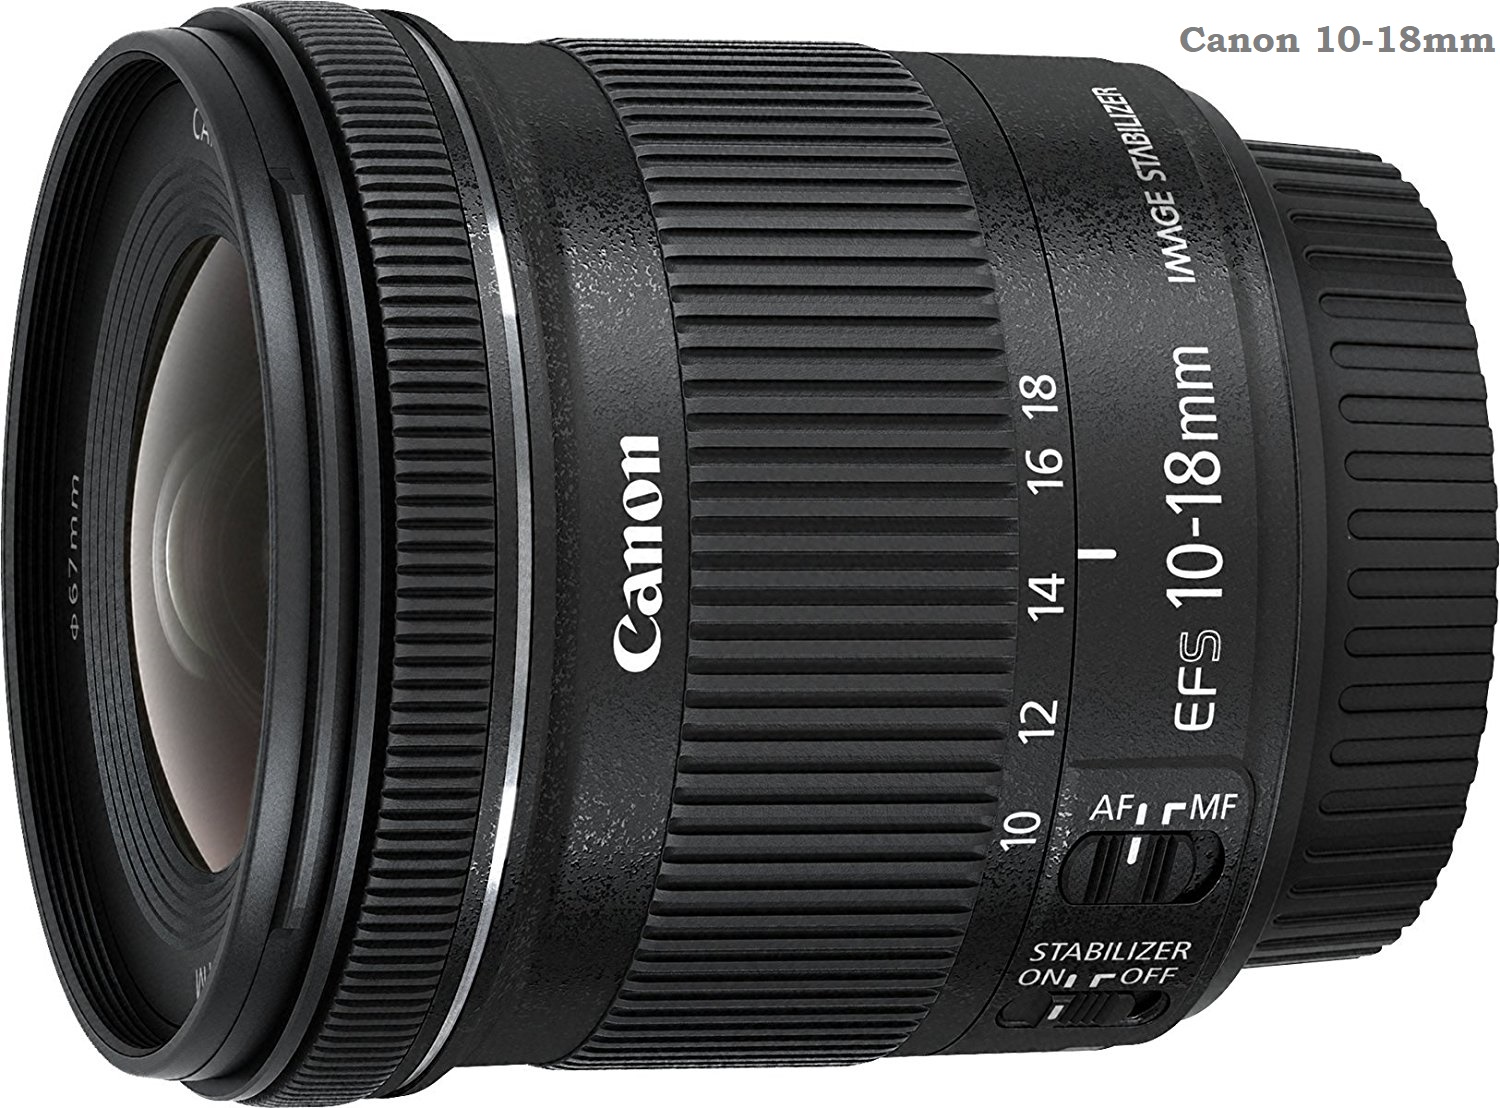 5 best lenses to upgrade your DSLR